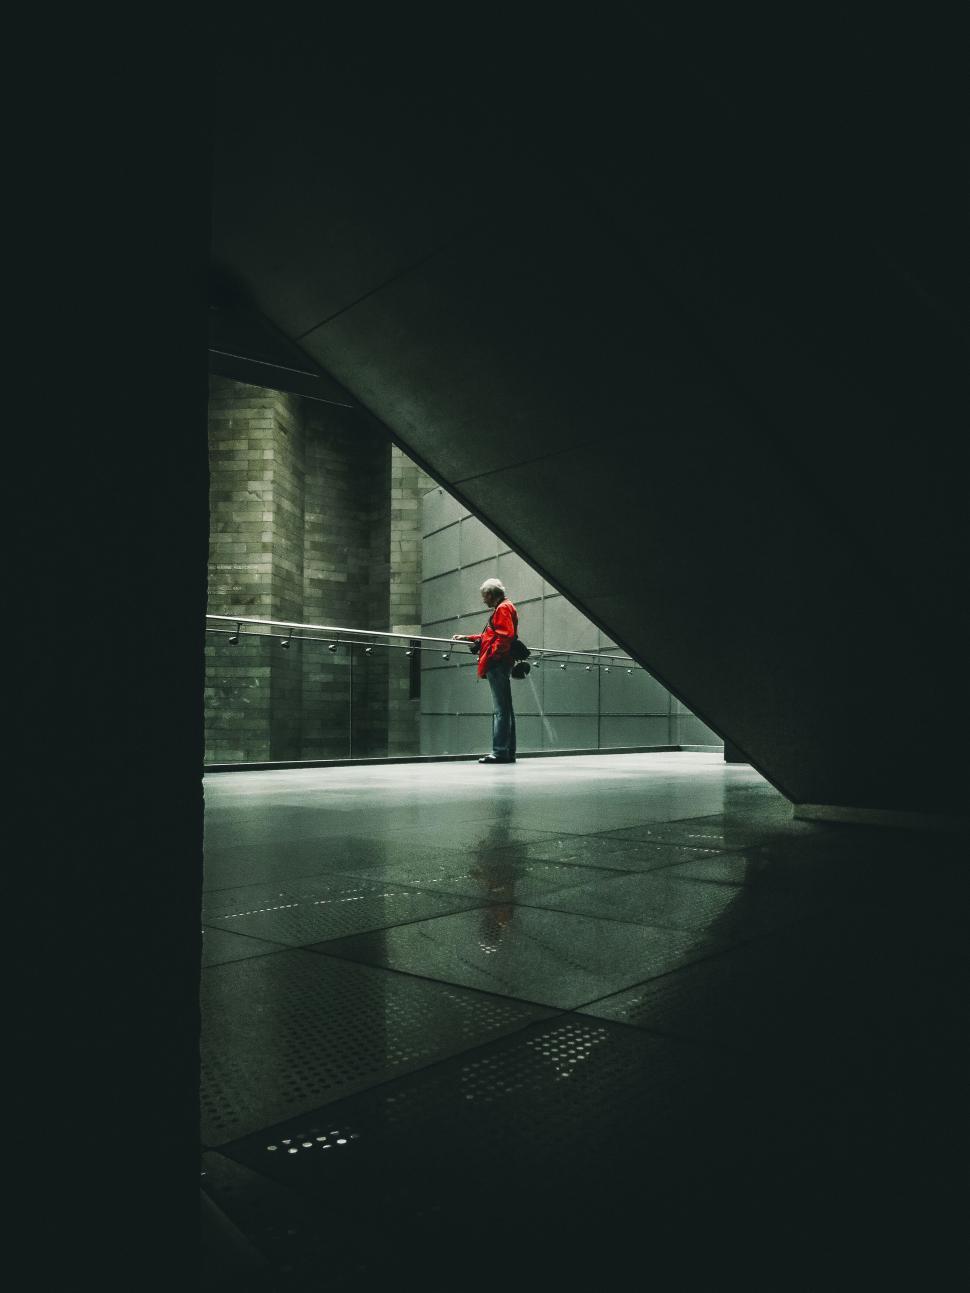 Free Image of Silhouette of person in red on modern architecture 